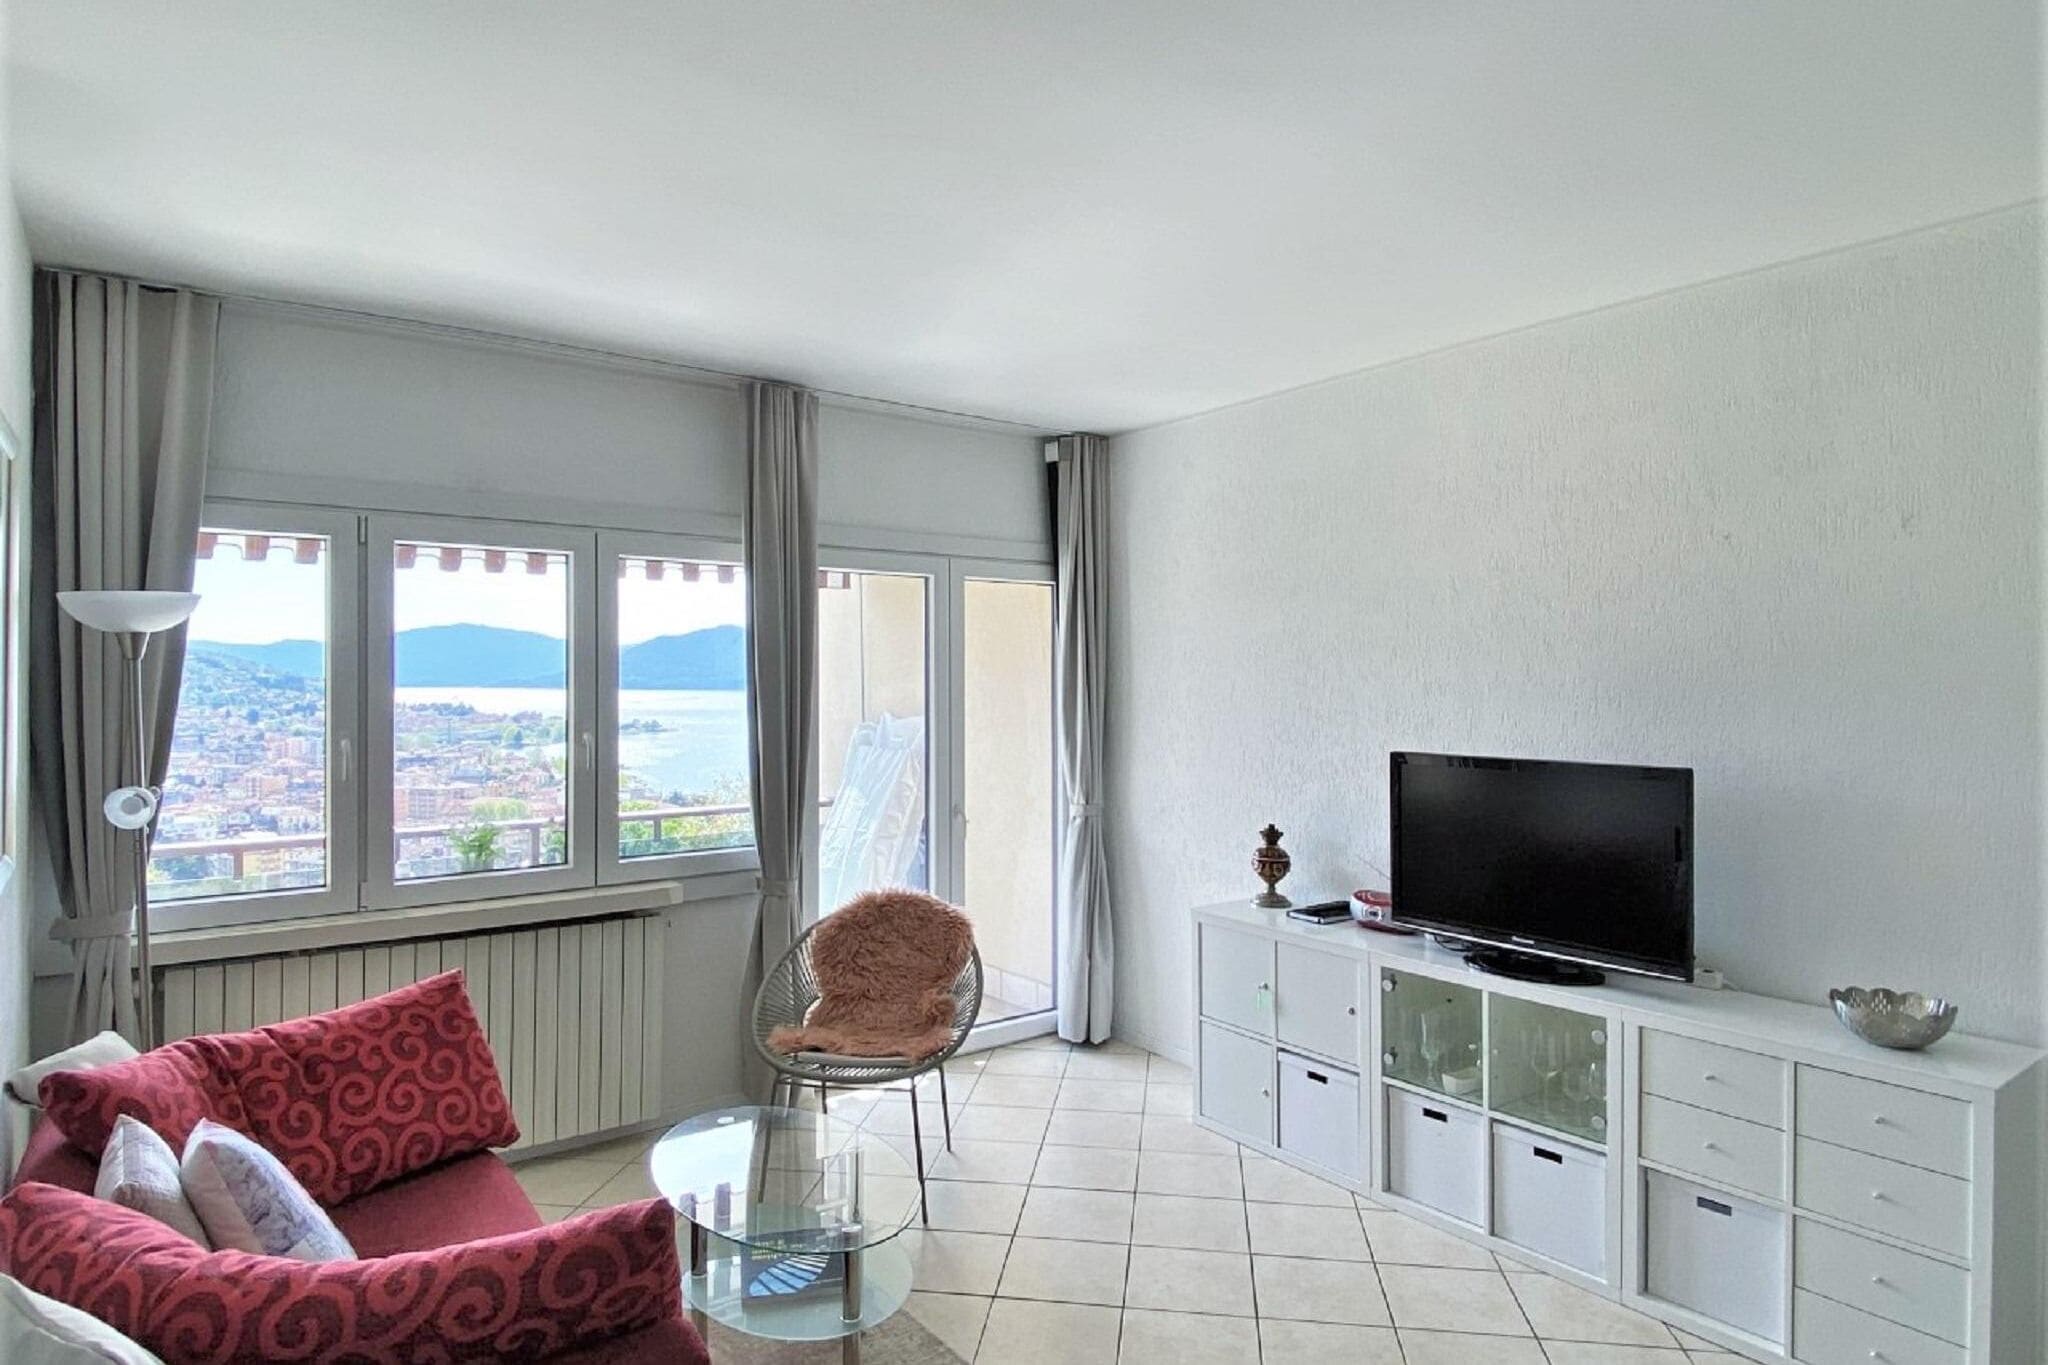 Romantic apartment in Luino with shared pool